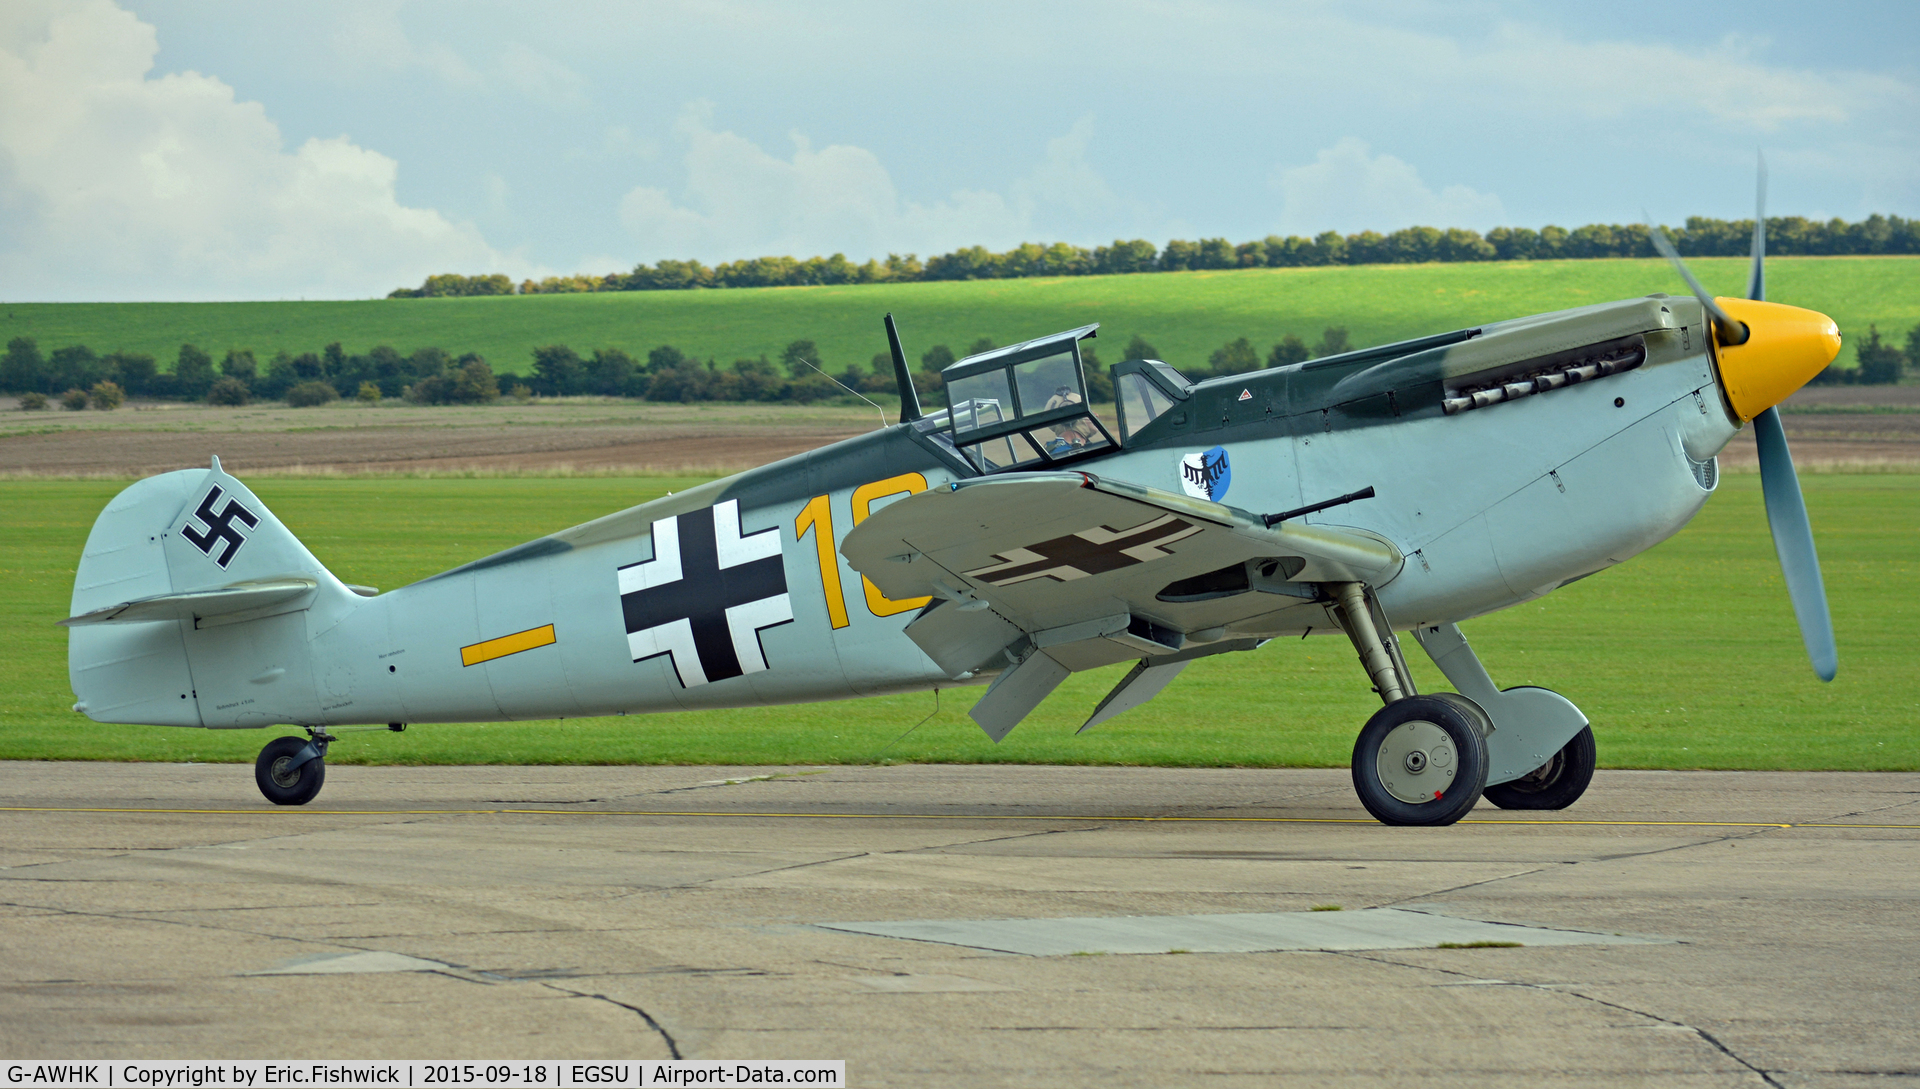 G-AWHK, 1949 Hispano HA-1112-M1L Buchon C/N 172, 2. G-AWHK (formerly BWUE) on the eve of The Battle of Britain (75th.) Anniversary Air Show, Sept. 2015.